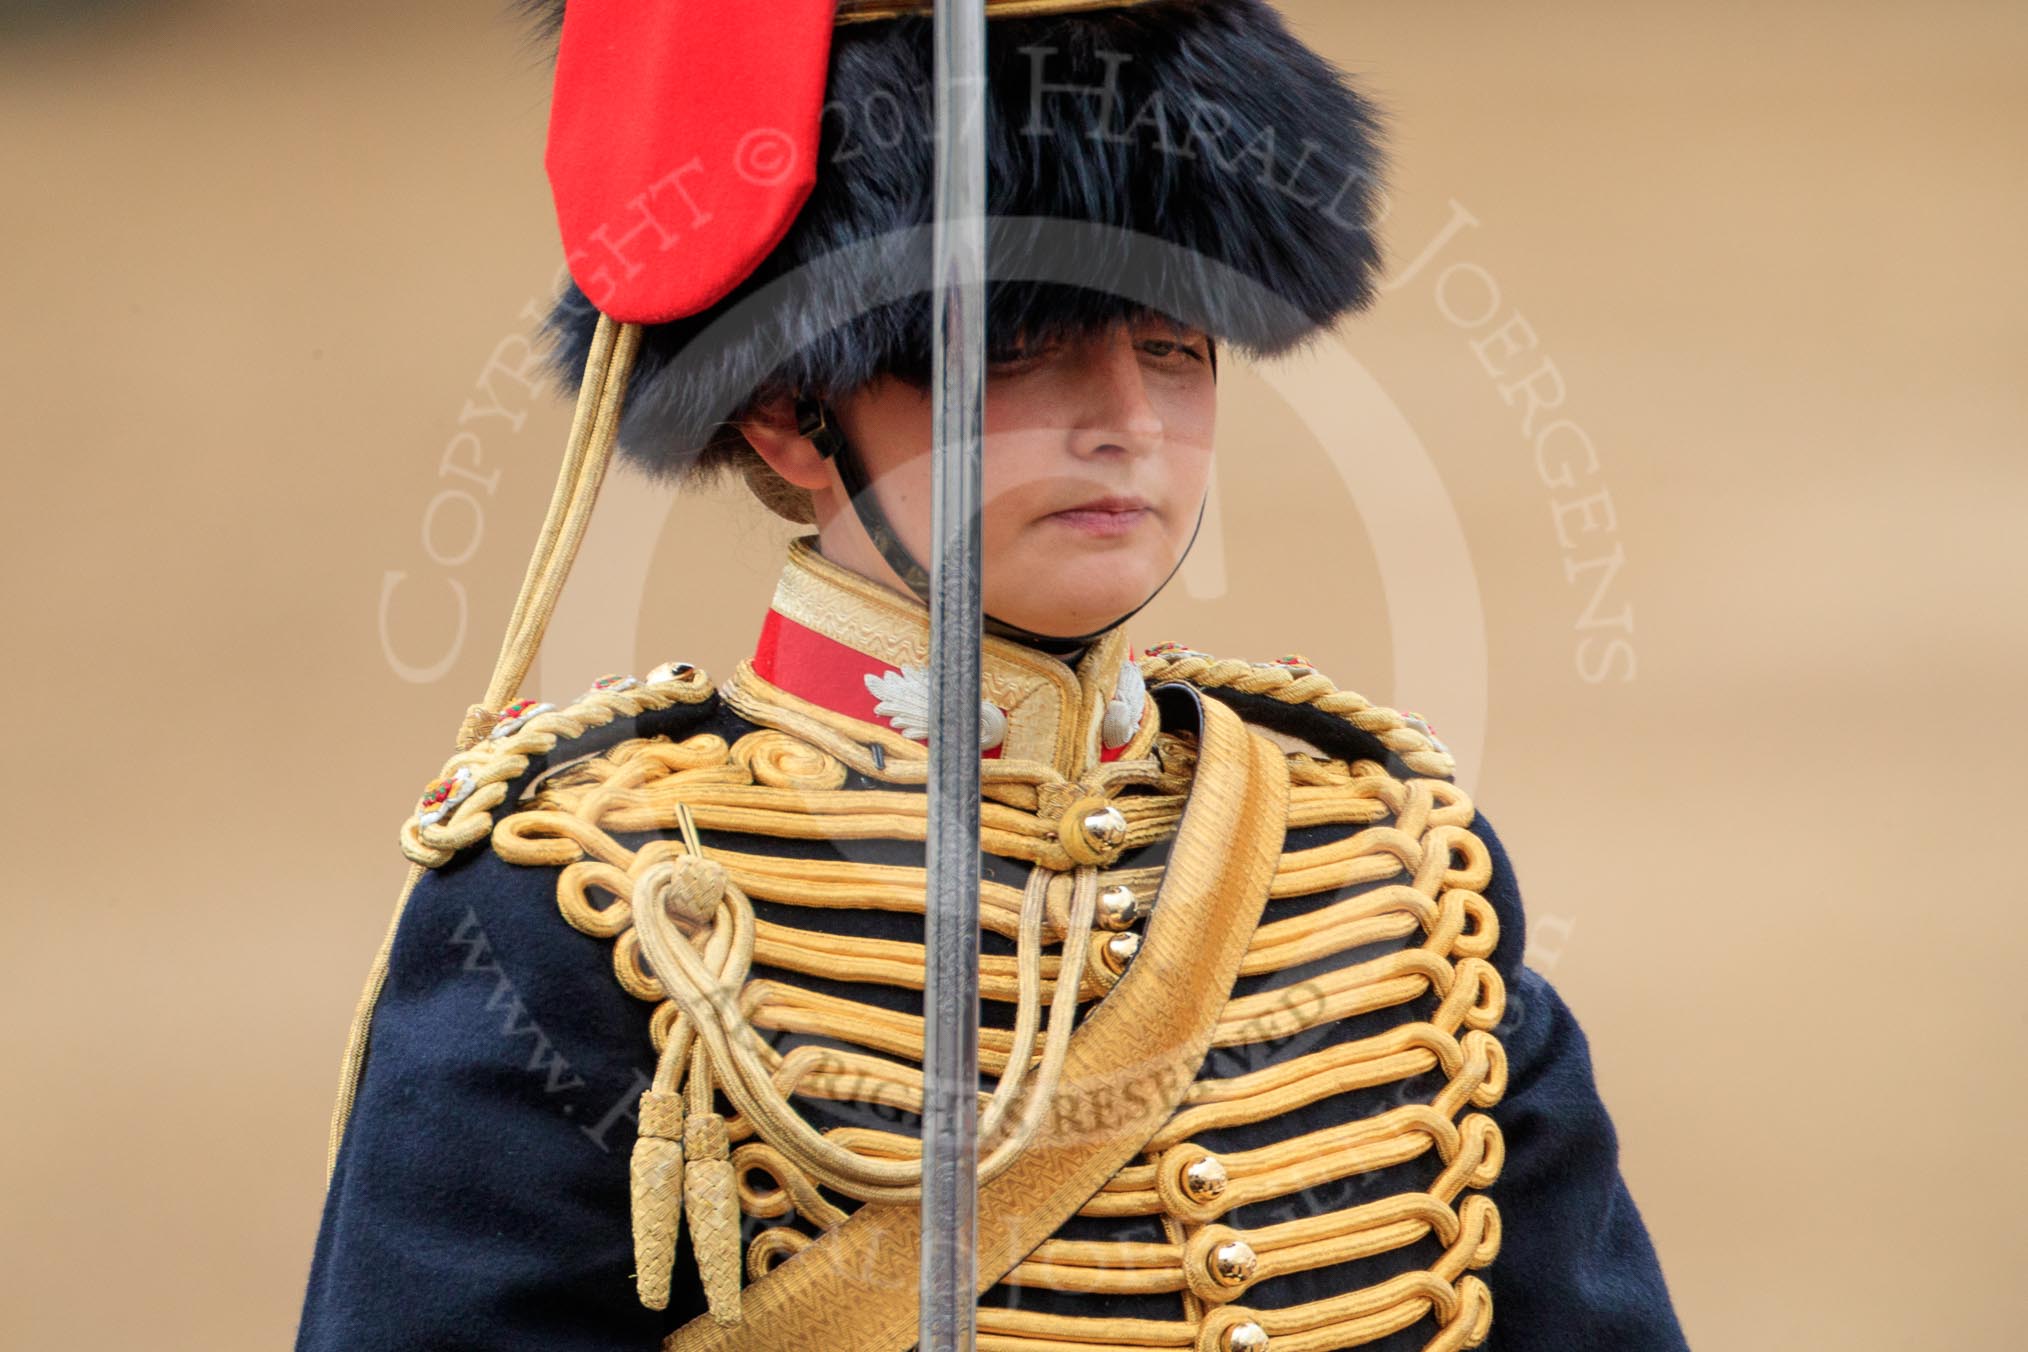 during The Colonel's Review {iptcyear4} (final rehearsal for Trooping the Colour, The Queen's Birthday Parade)  at Horse Guards Parade, Westminster, London, 2 June 2018, 11:57.